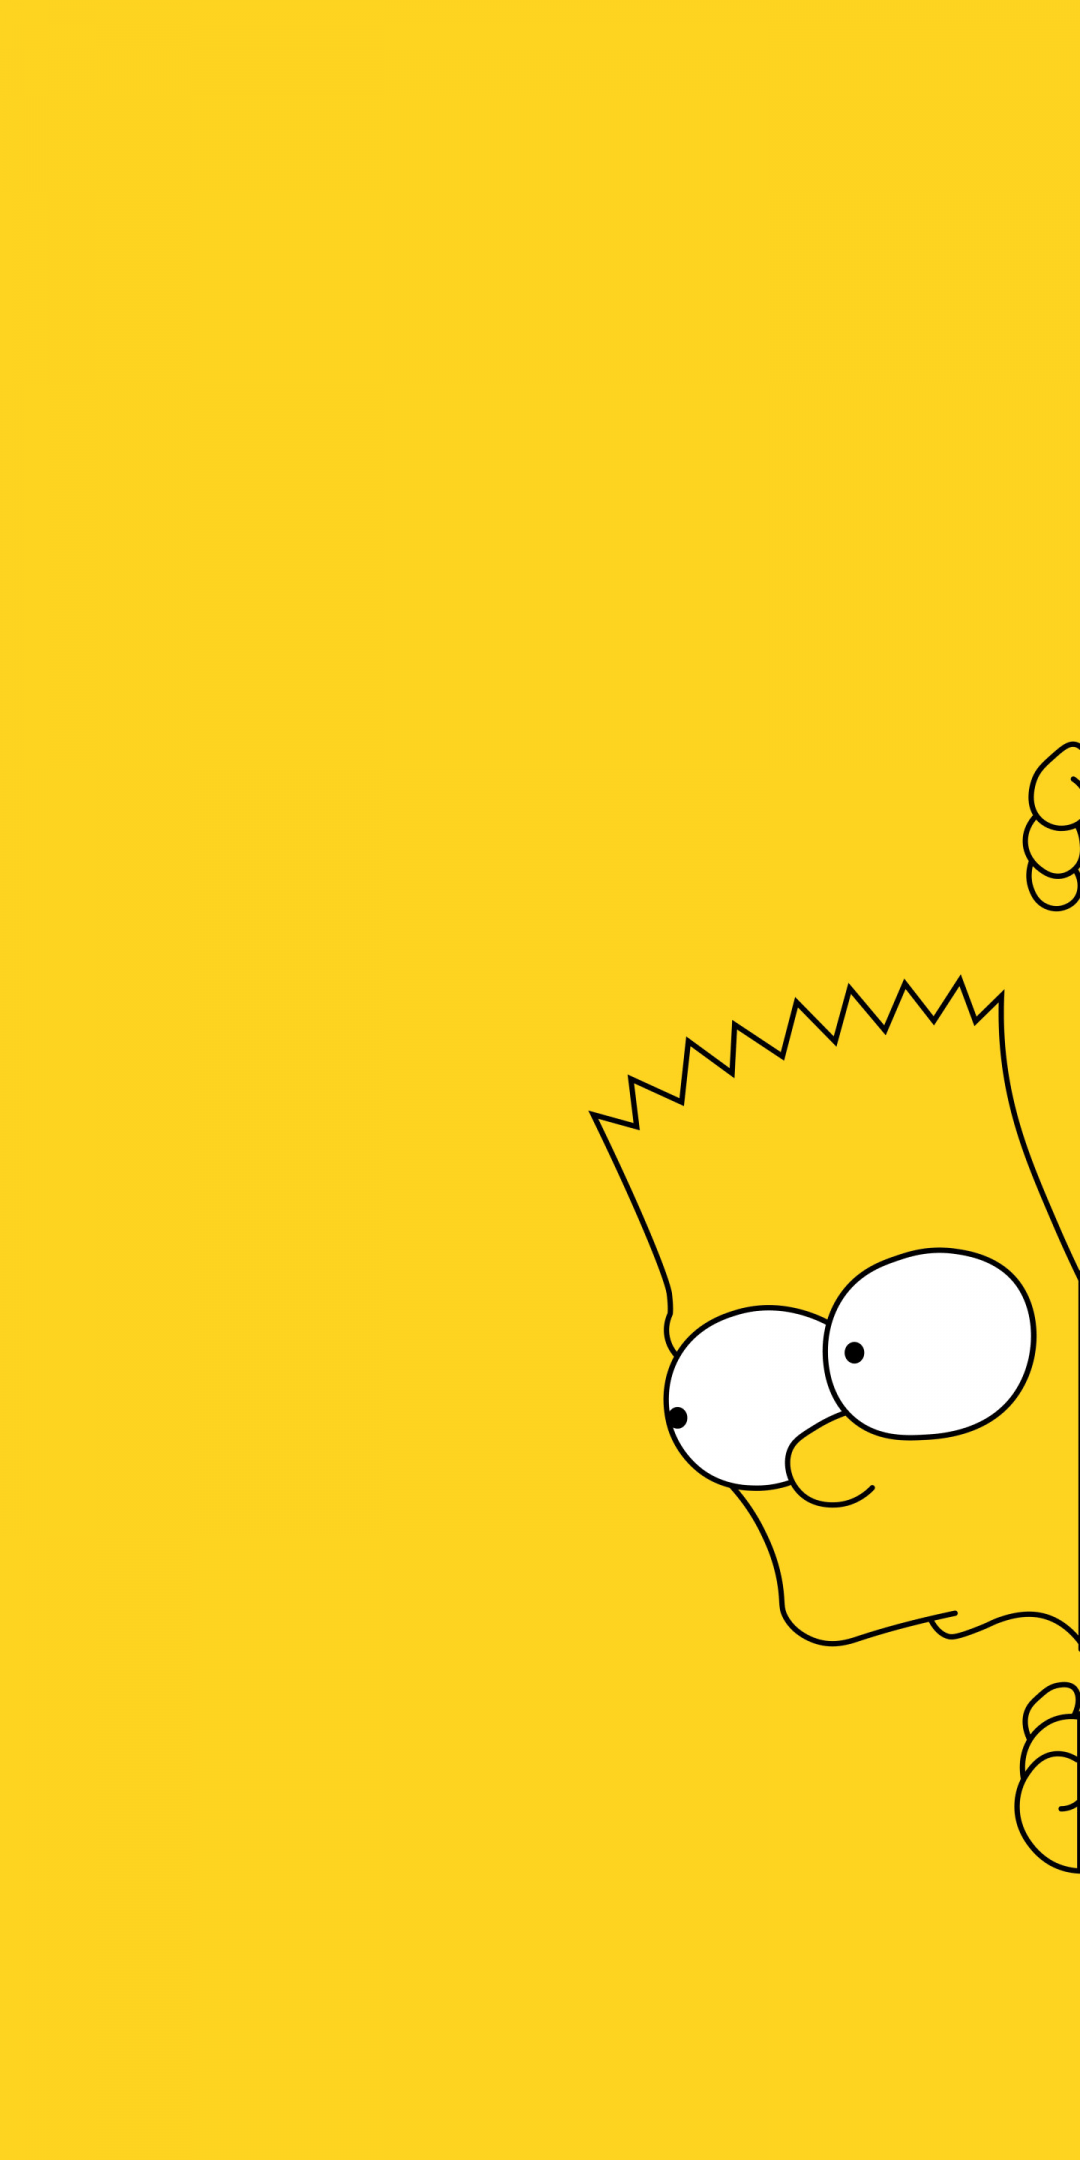 The simpsons wallpaper on a yellow background - The Simpsons